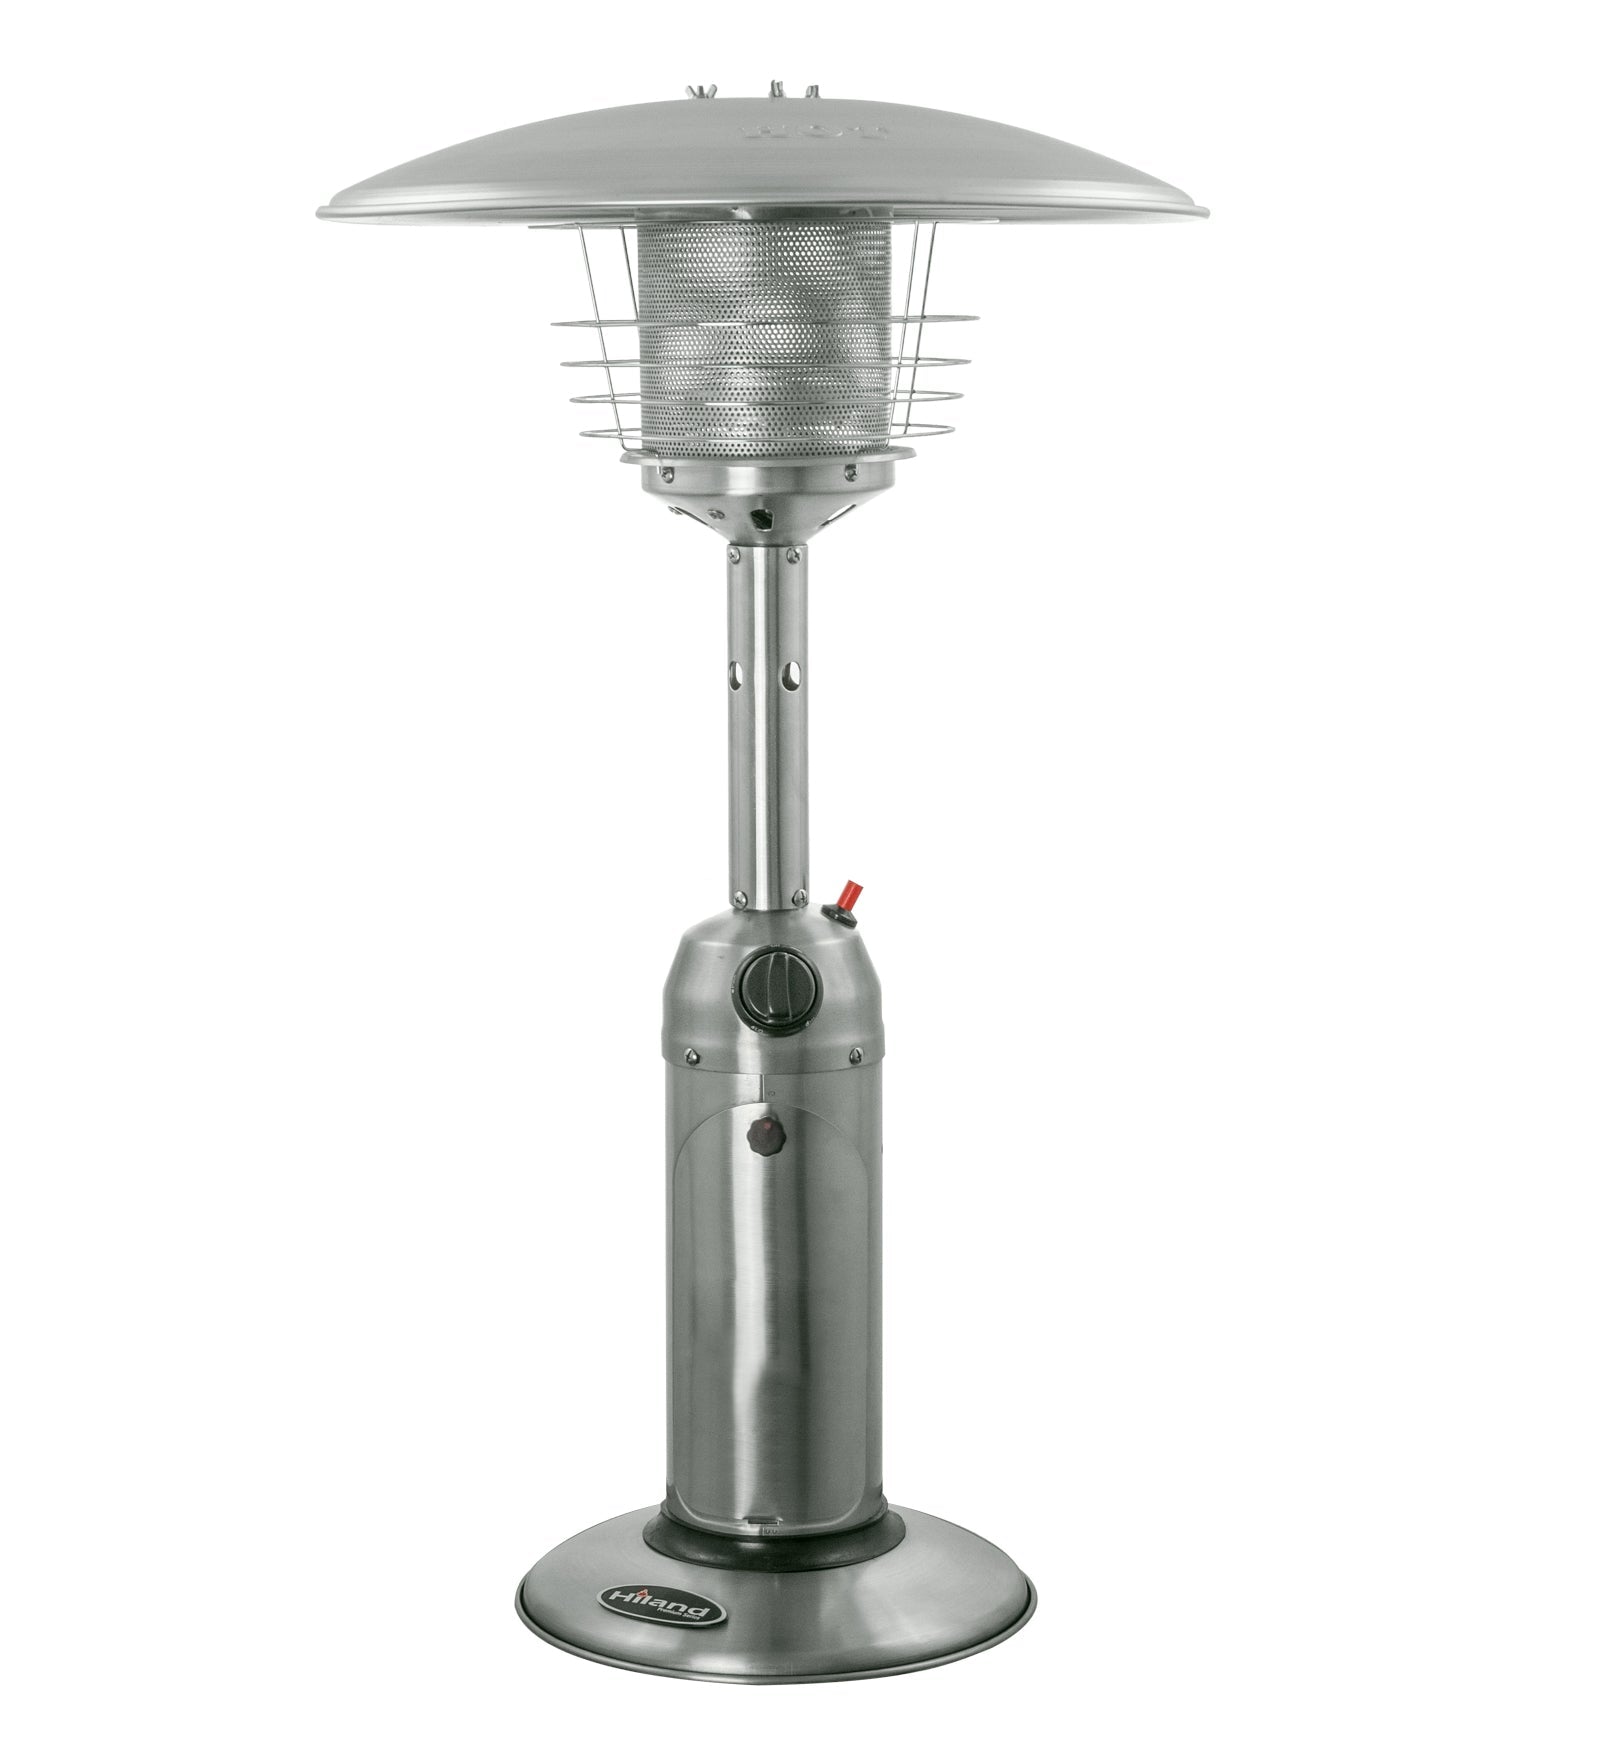 Hiland Outdoor Tabletop Patio Heater -Stainless Steel-HLDS032-B-Main View